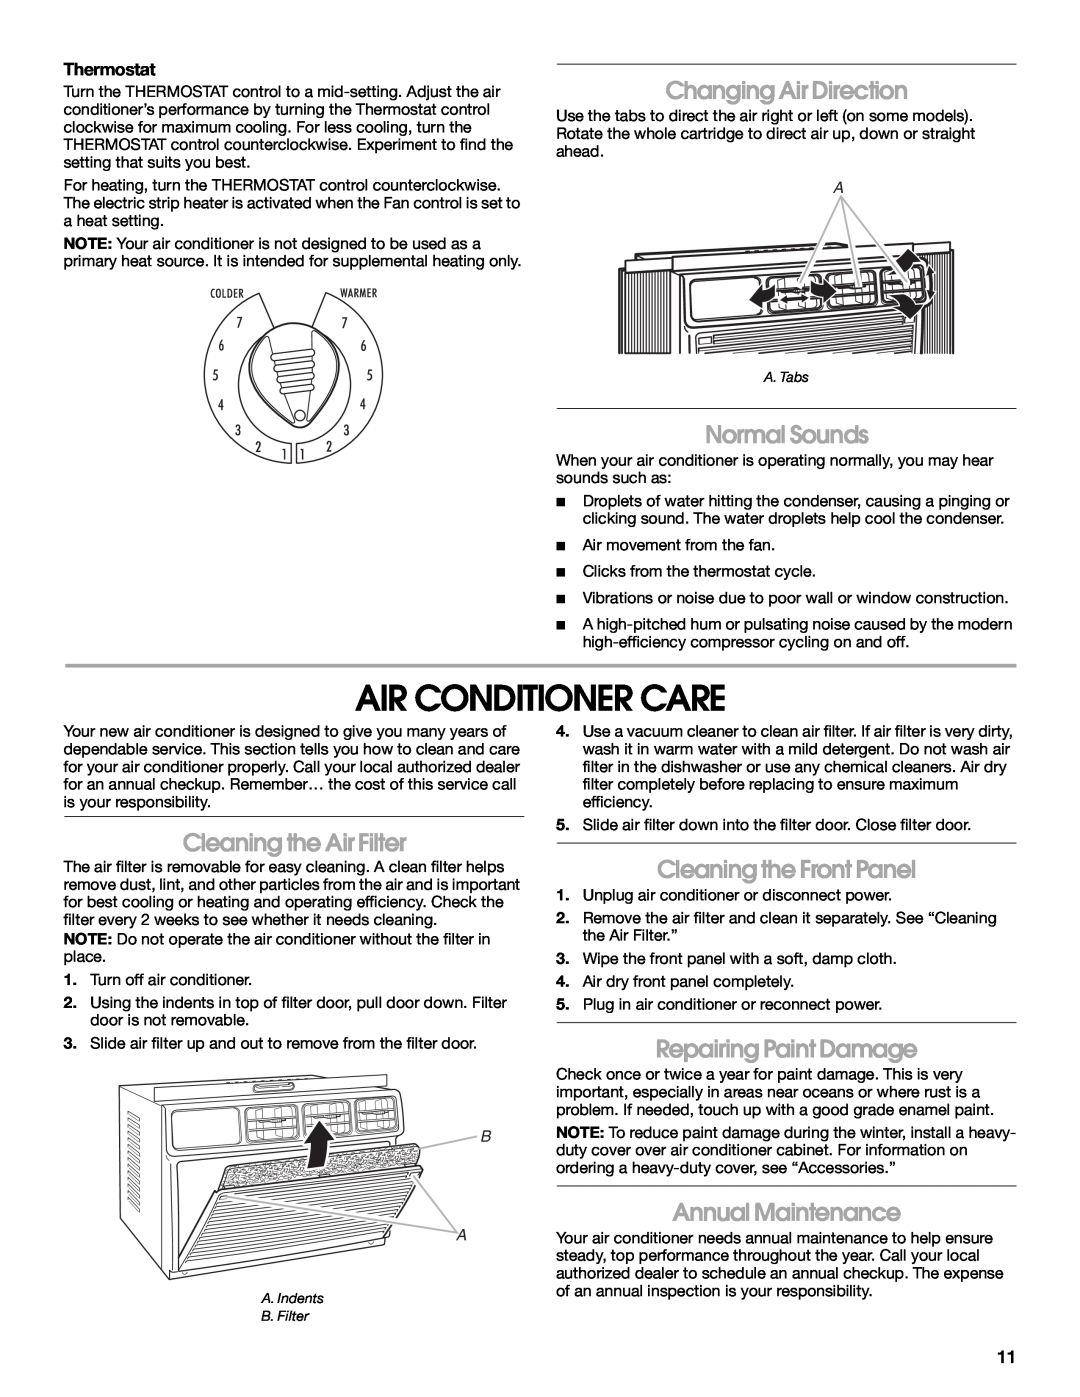 Whirlpool ACE082XP1 manual Air Conditioner Care, Changing Air Direction, Normal Sounds, Cleaning the Air Filter, Thermostat 